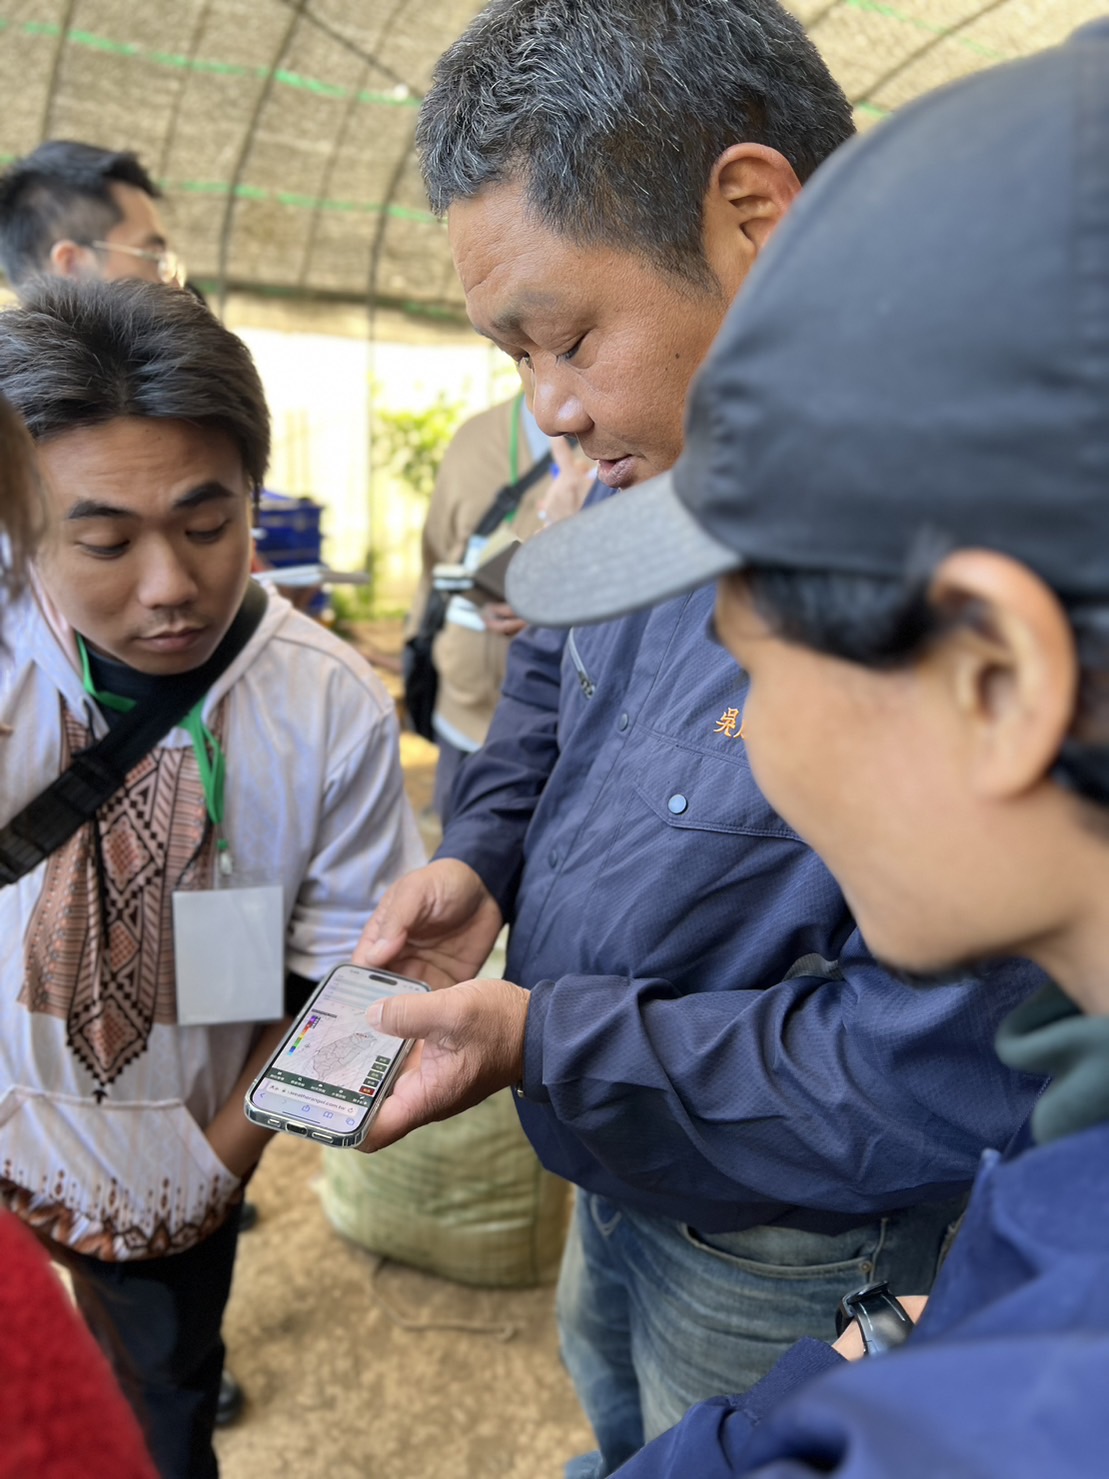 The head of the “Peifang Comprehensive Organic Farm,” surnamed Wu, demonstrated to students how he uses his cell phone to access an intelligent monitoring and control system.